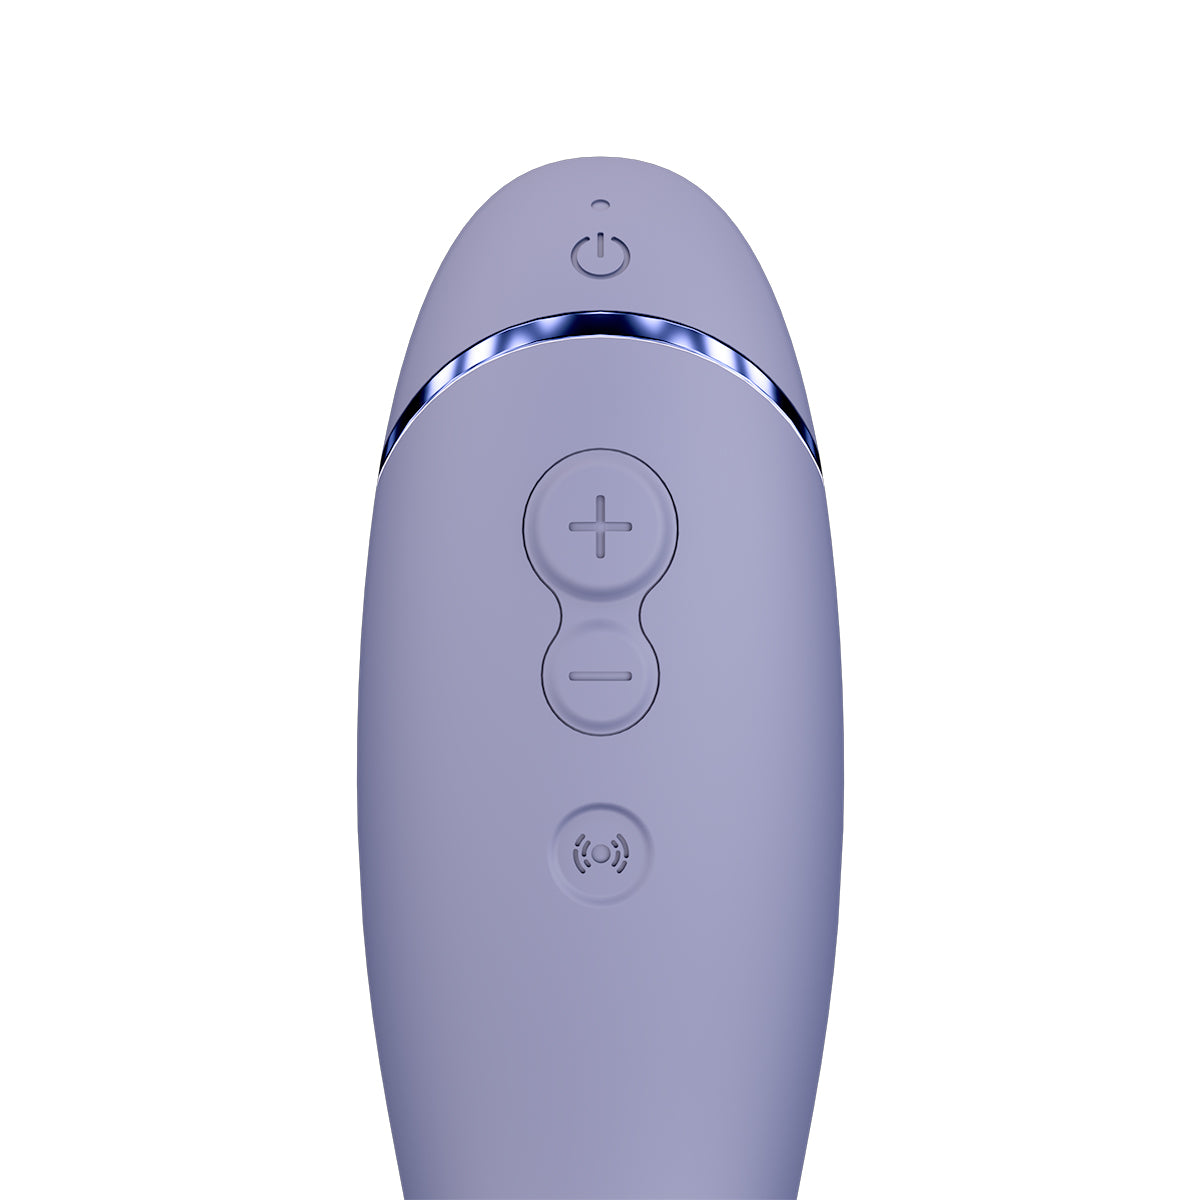 Womanizer OG - Lilac Intimates Adult Boutique